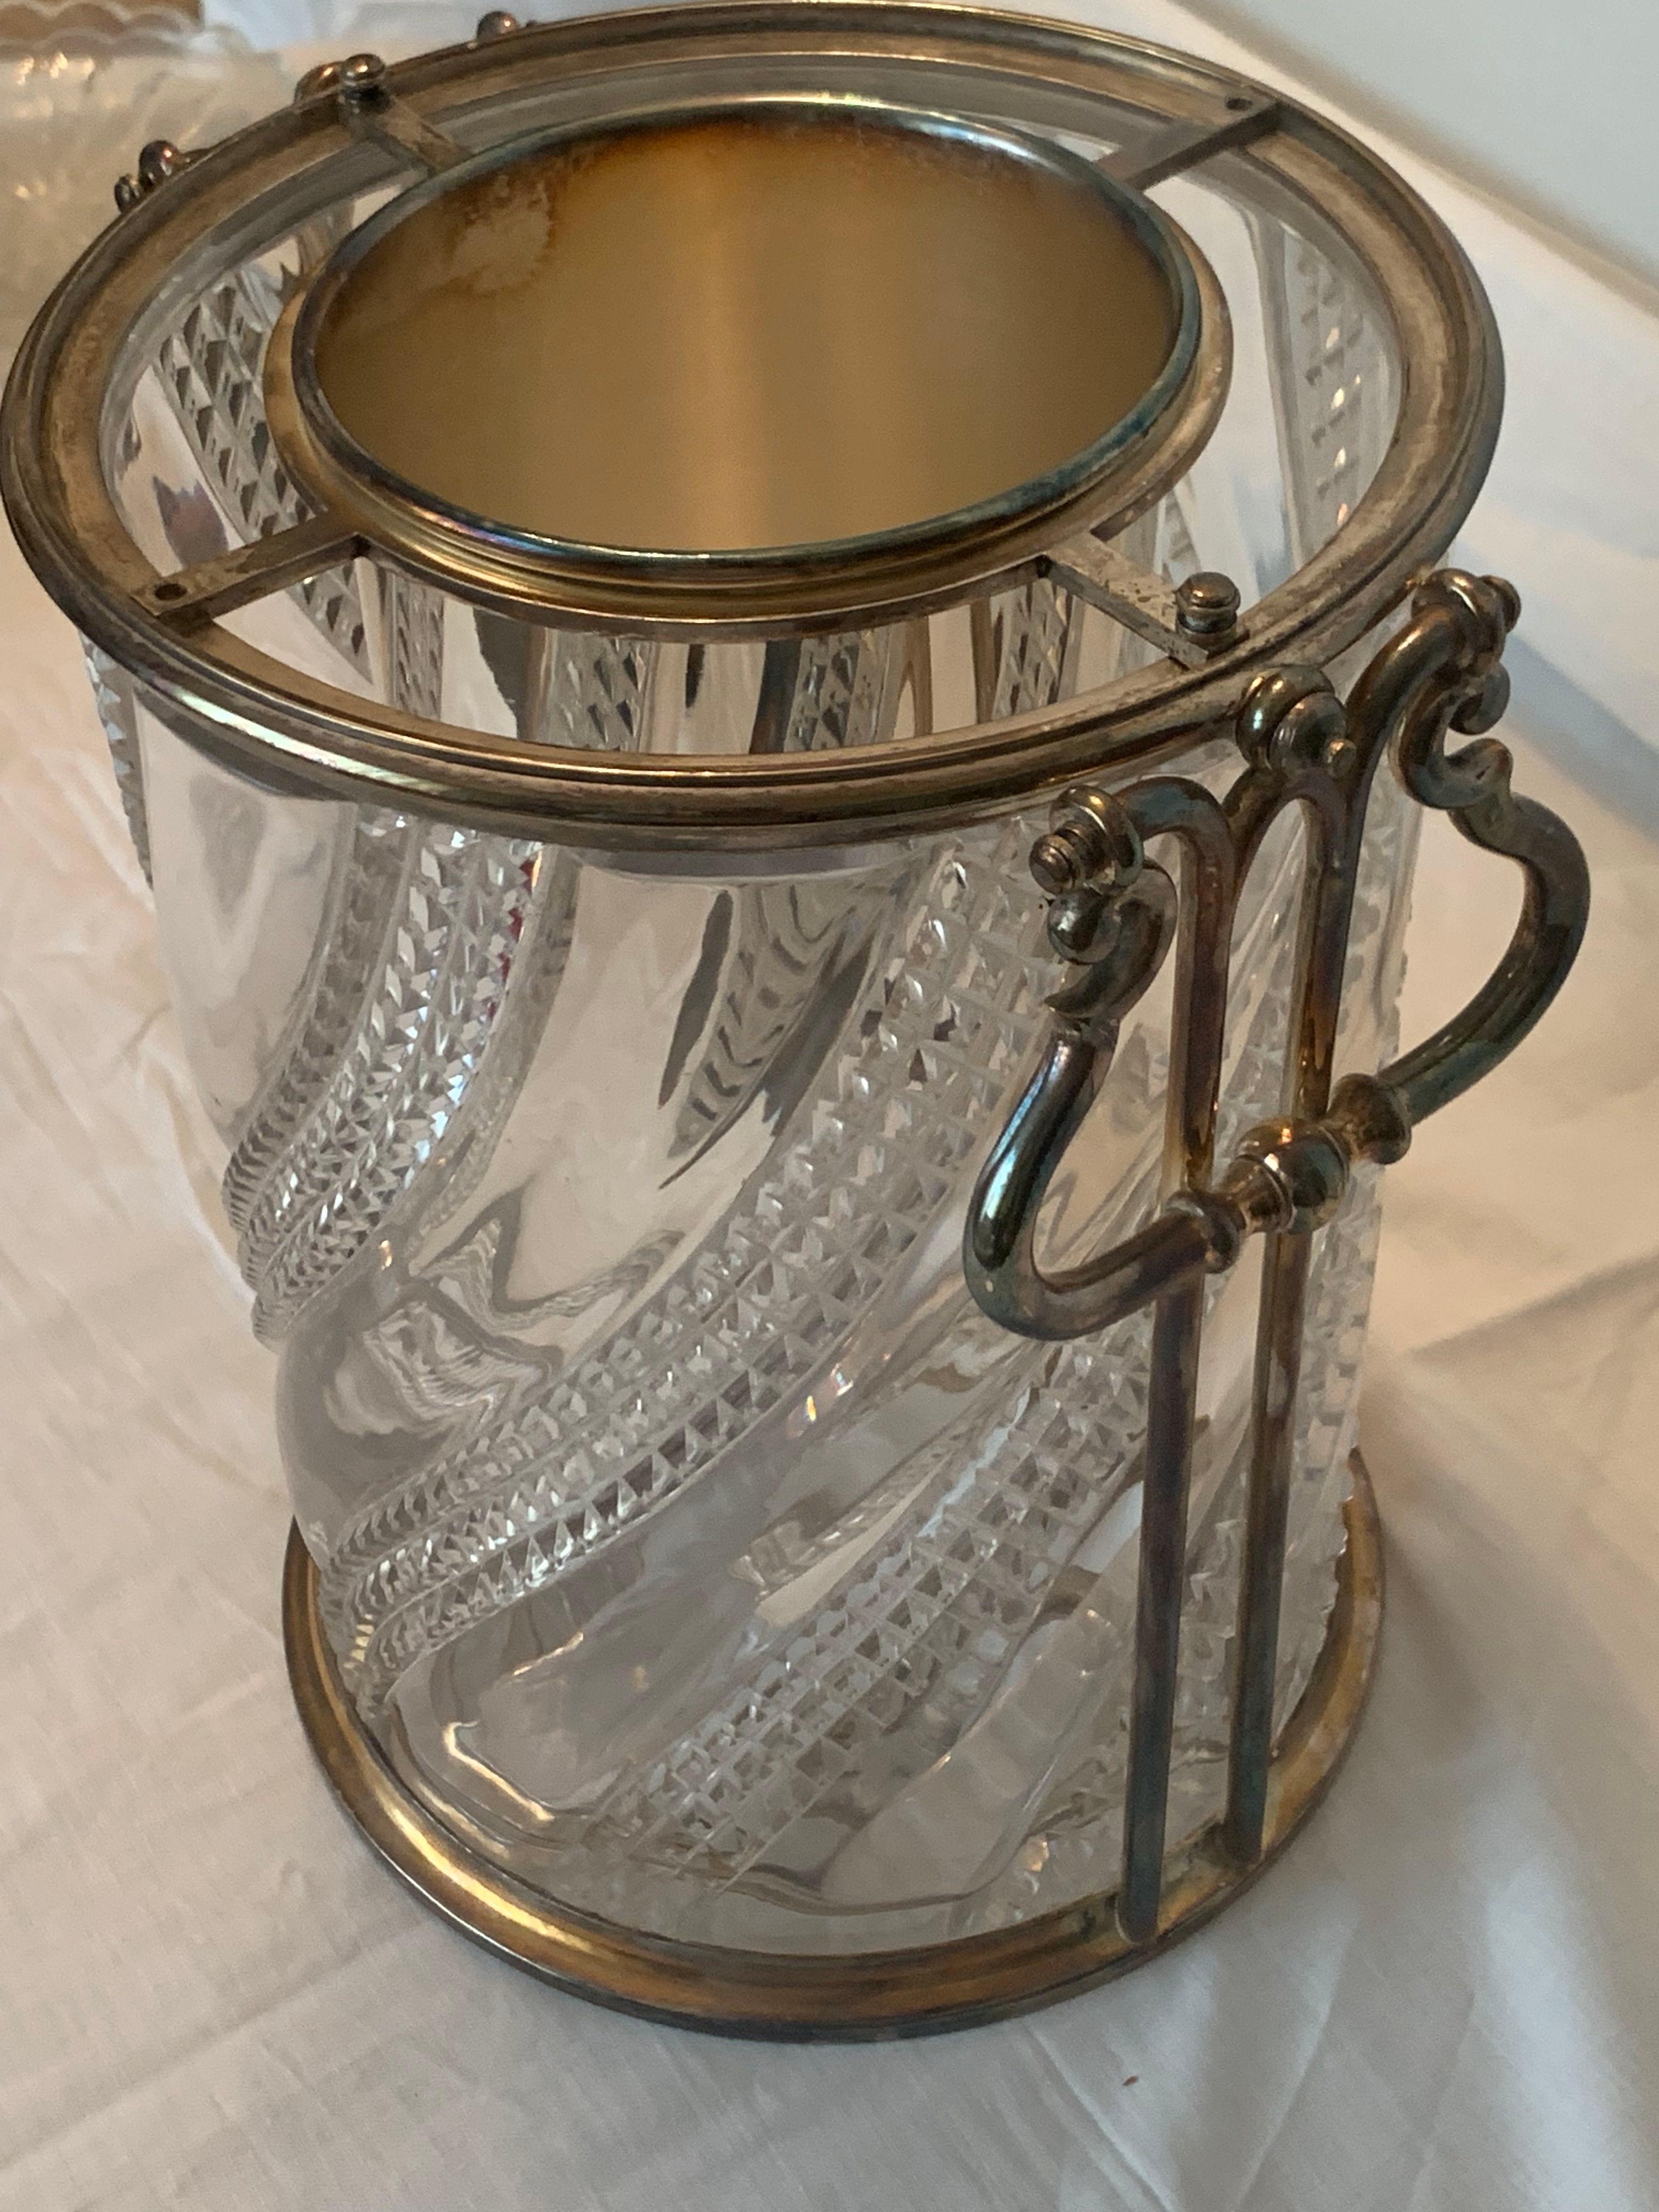 Rare ice buckets in crystal and silver plate bronze probably by baccarat
Champagne or wine sealsin crystal and bronze with a cylinder inside to put a bottle
on the represents a magnificent object to decorate a table for a dinner and also  decorative